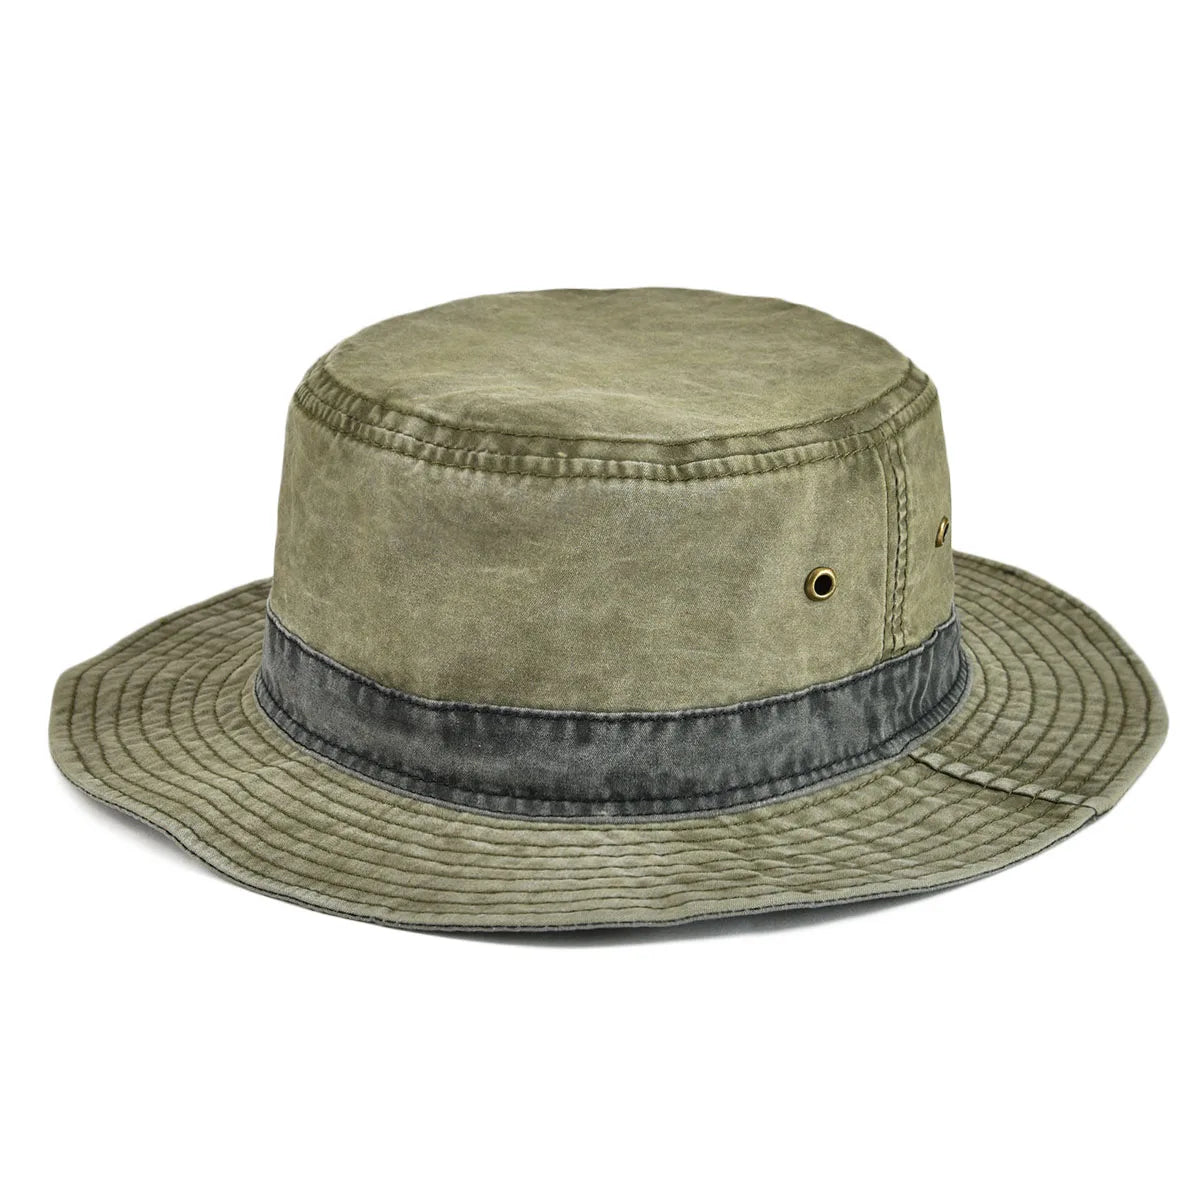 Men's Summer Outdoor Fishing Wide Brim Bucket Hat: Sun Protection Cap for Hunting, crafted in Cotton